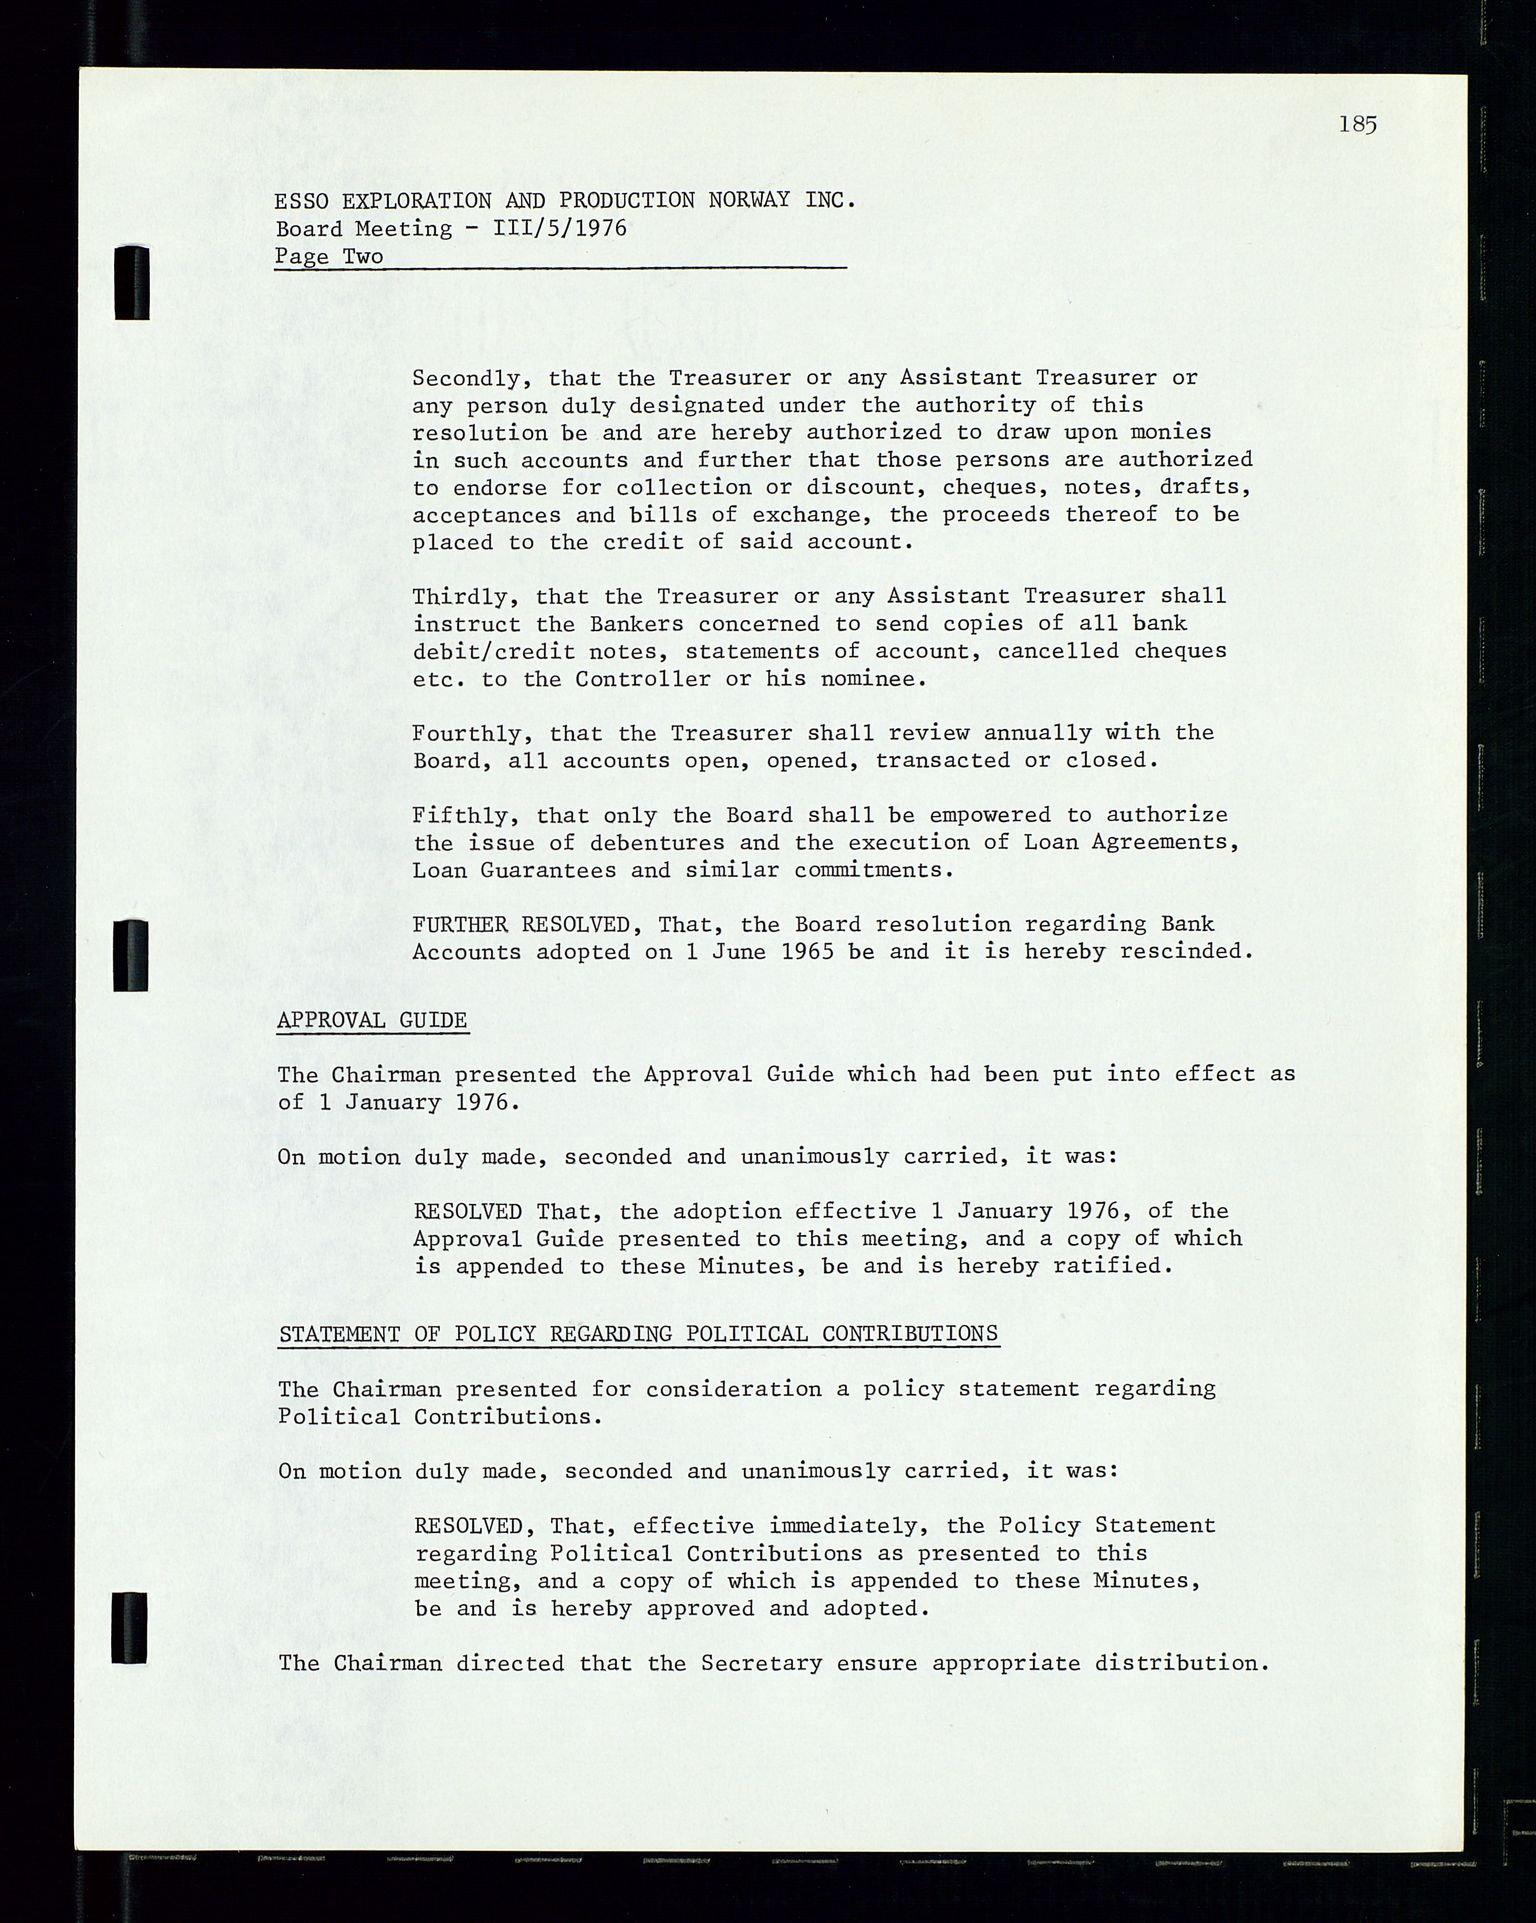 Pa 1512 - Esso Exploration and Production Norway Inc., SAST/A-101917/A/Aa/L0001/0002: Styredokumenter / Corporate records, Board meeting minutes, Agreements, Stocholder meetings, 1975-1979, s. 26